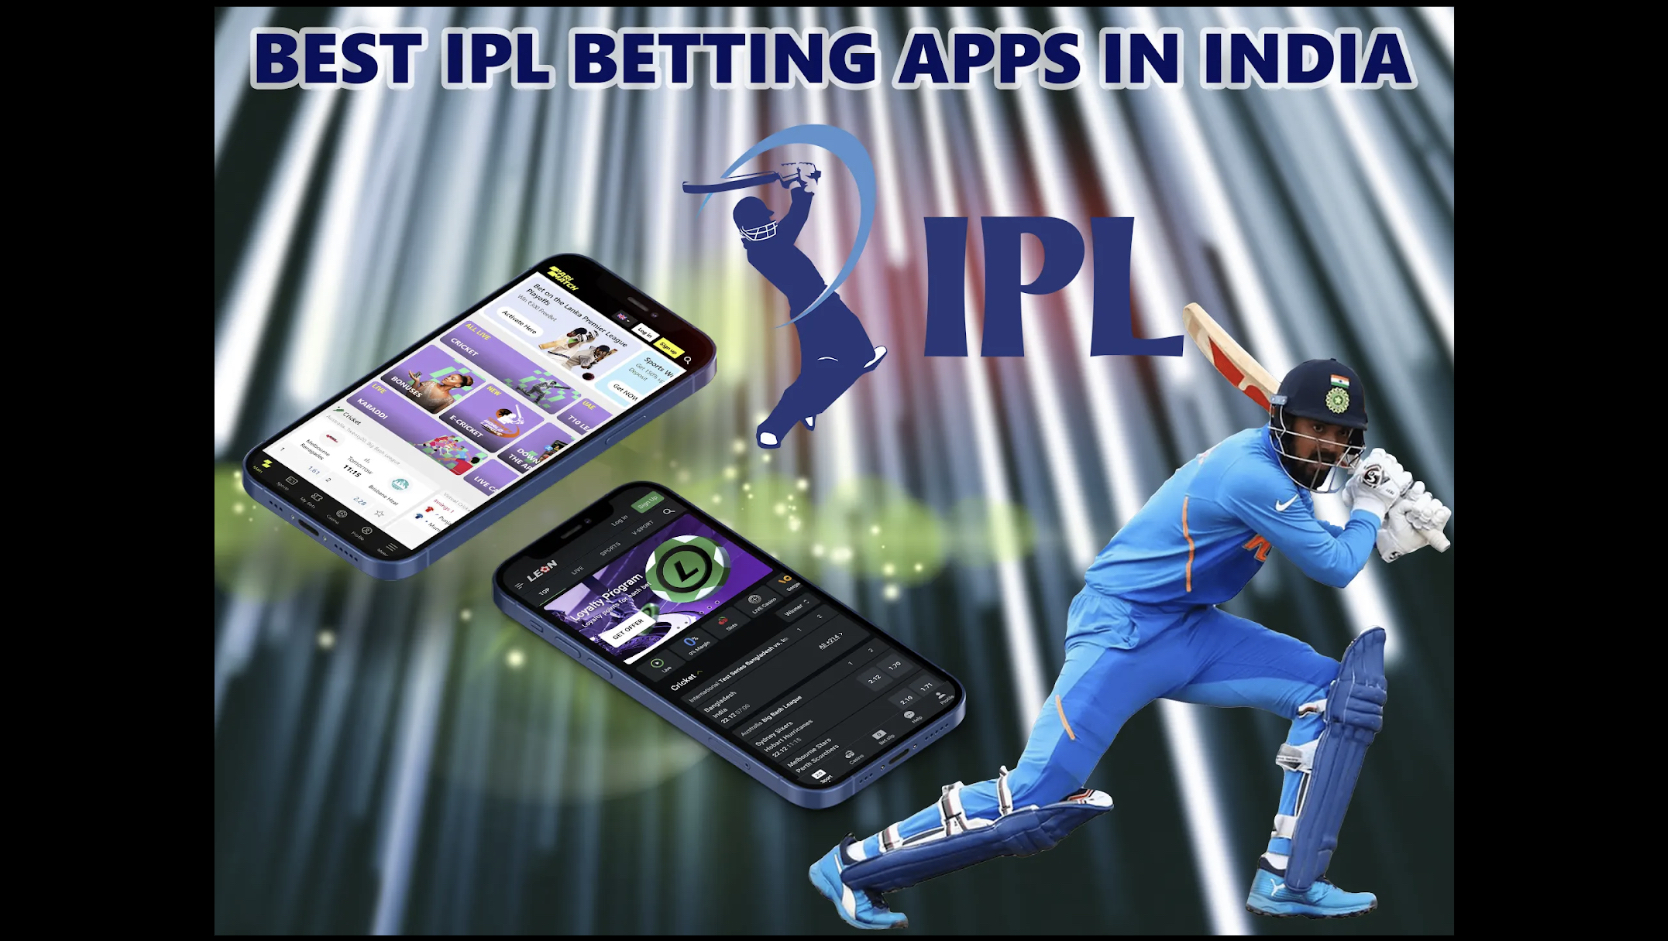 Are You Struggling With Online Betting App Ipl? Let's Chat